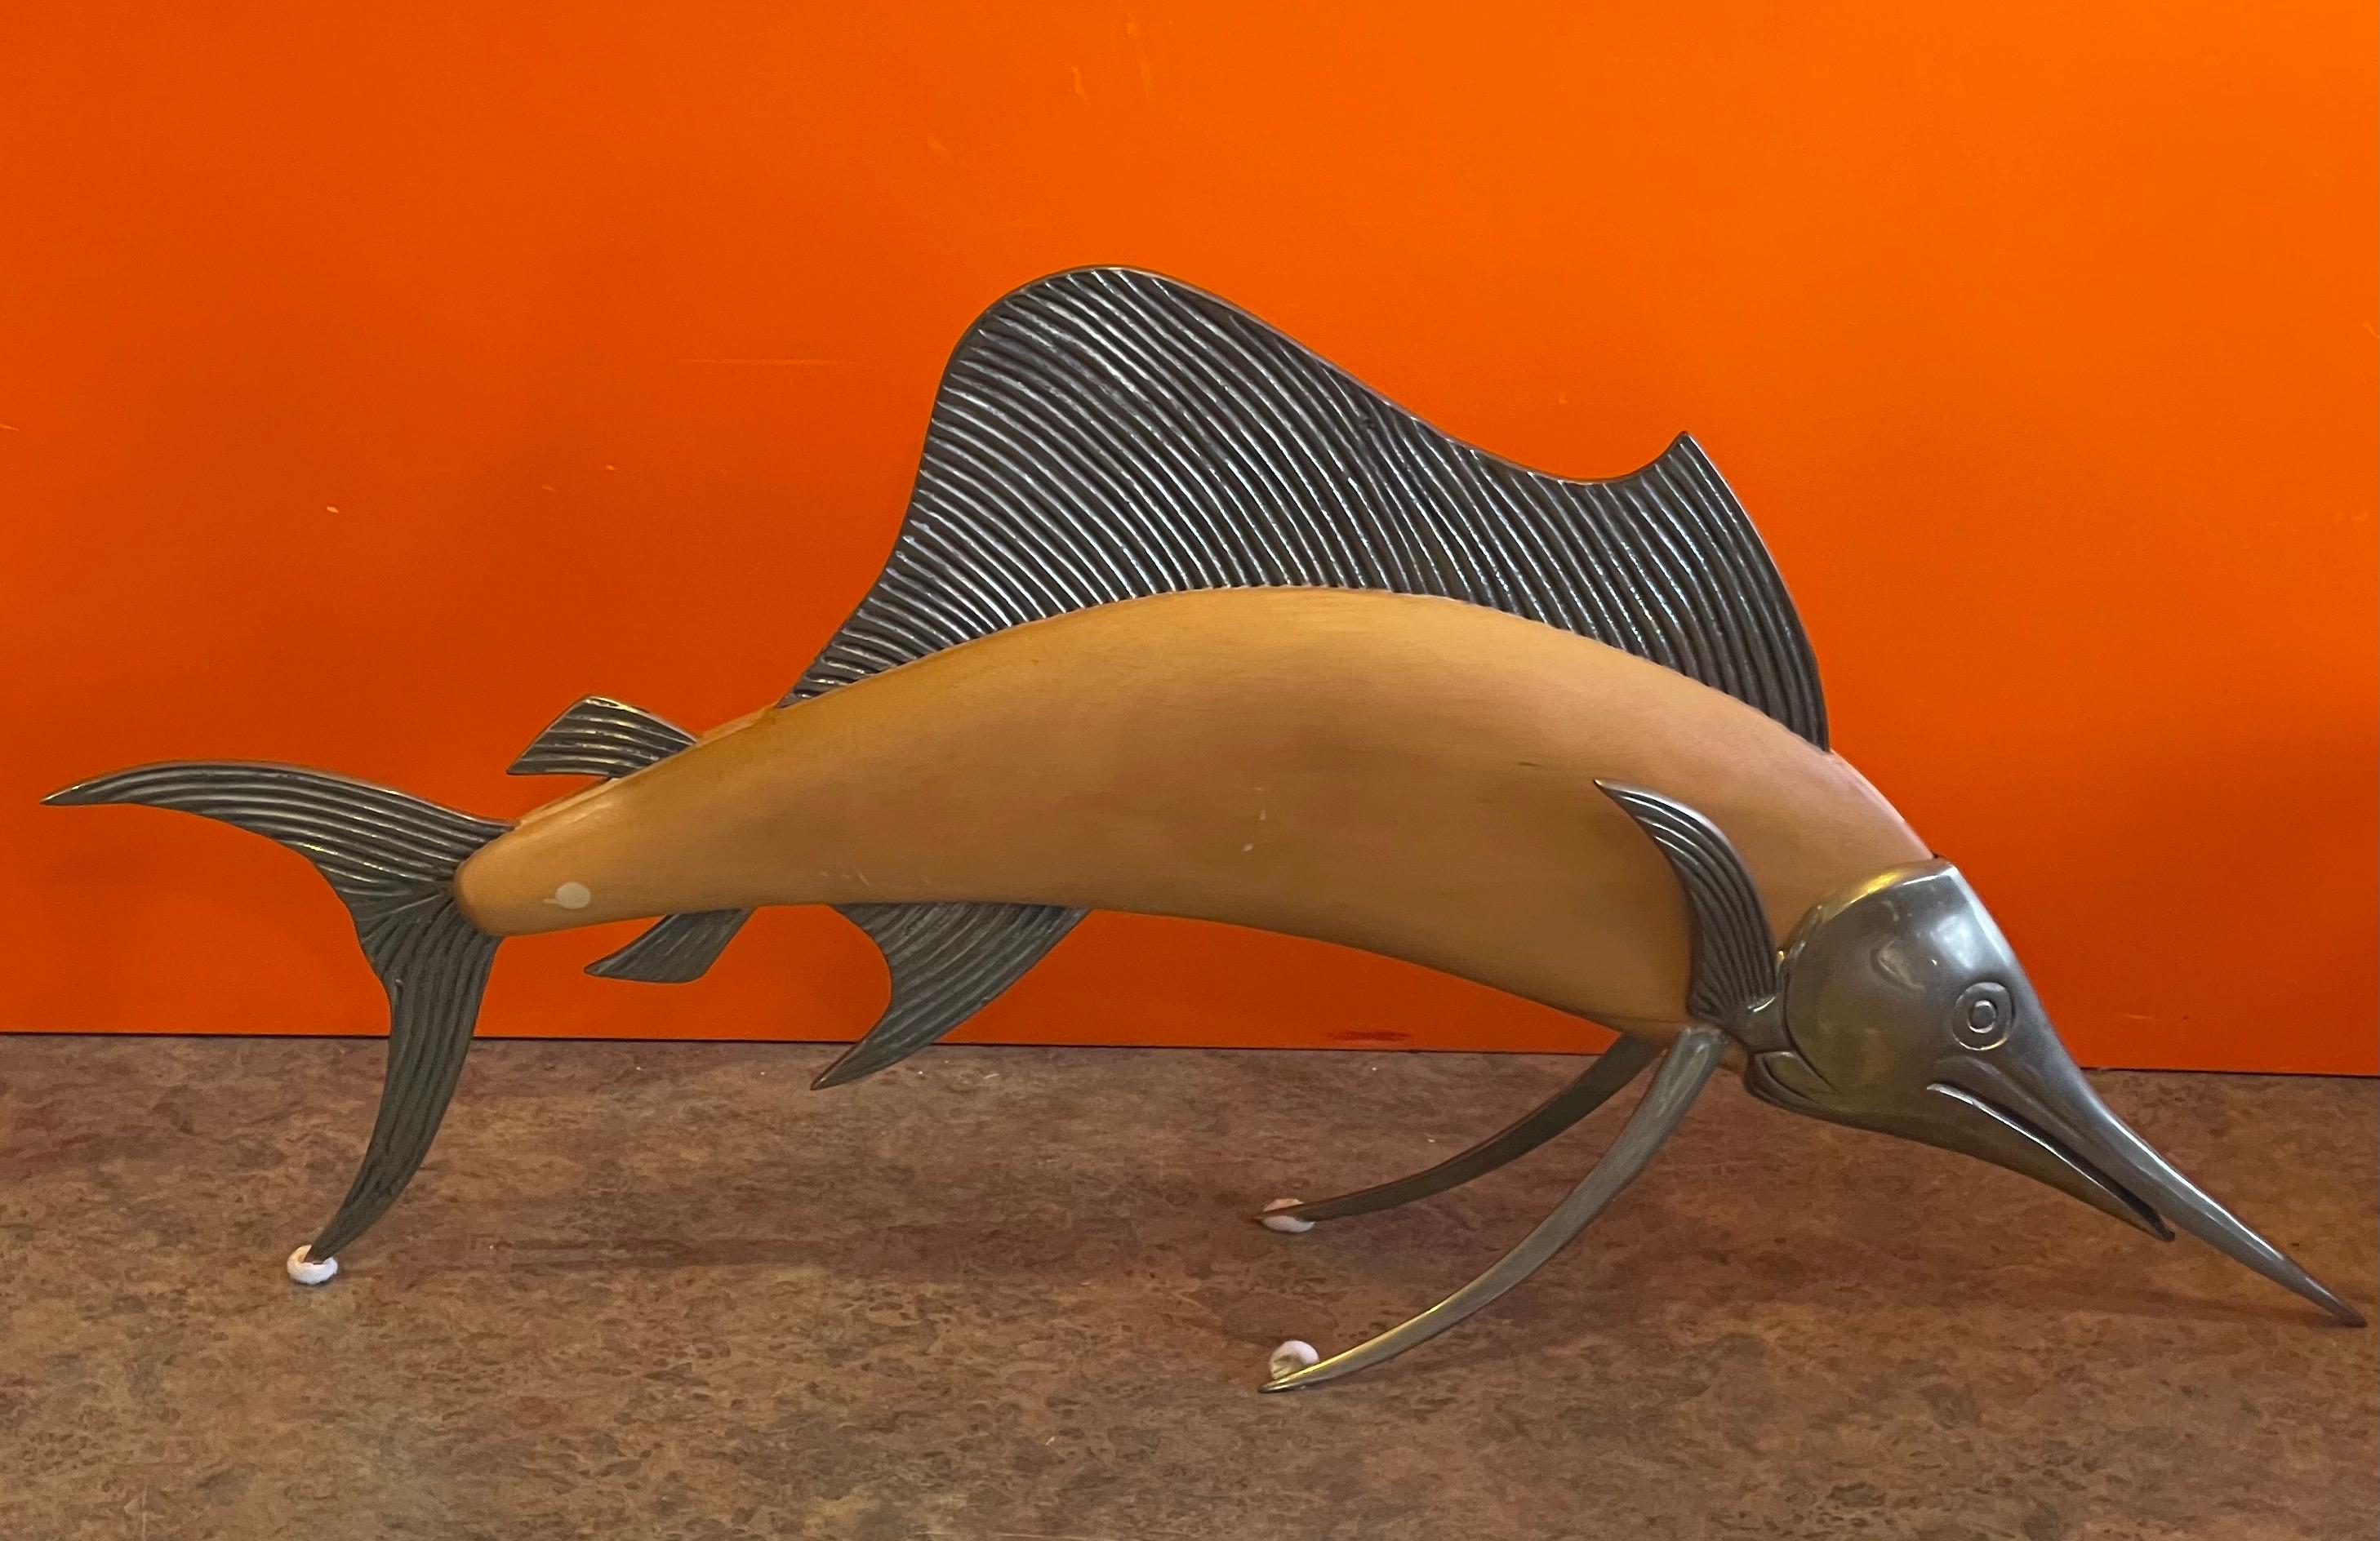 Vintage MCM large brass and light wood sailfish / marlin sculpture by Frederick Cooper, circa 1970s.  The piece is free-standing and in good vintage condition; it measures 25.5